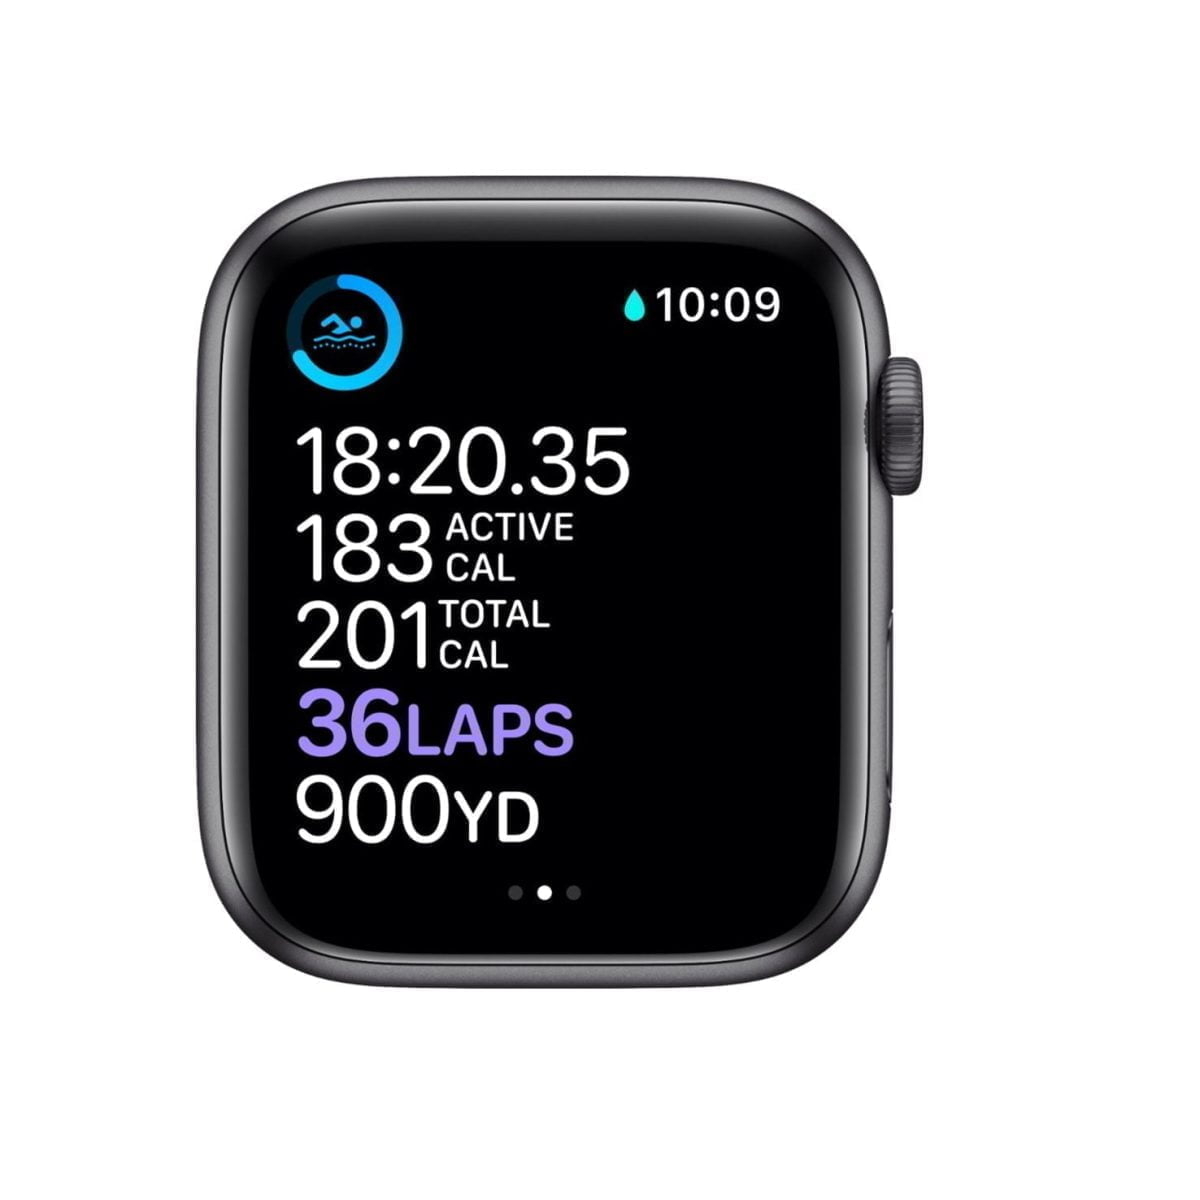 6215931Cv13D 1.Jpgmaxheight1000Maxwidth1000 1 Apple &Lt;Div Class=&Quot;Sku-Title&Quot;&Gt; &Lt;H1 Class=&Quot;Heading-5 V-Fw-Regular&Quot;&Gt;Apple Watch Series 6 (Gps) 44Mm Space Gray Aluminum Case With Black Sport Band - Space Gray&Lt;/H1&Gt; &Lt;/Div&Gt; &Lt;Div Class=&Quot;Long-Description-Container Body-Copy &Quot;&Gt; &Lt;Div Class=&Quot;Product-Description&Quot;&Gt;Apple Watch Series 6 Lets You Measure Your Blood Oxygen Level With A Revolutionary New Sensor And App.¹ Take An Ecg From Your Wrist.² See Your Fitness Metrics On The Enhanced Always-On Retina Display, Now 2.5X Brighter Outdoors When Your Wrist Is Down. Set A Bedtime Routine And Track Your Sleep. And Reply To Calls And Messages Right From Your Wrist. It’s The Ultimate Device For A Healthier, More Active, More Connected Life.&Lt;/Div&Gt; &Lt;/Div&Gt; Apple Watch Series 6 (Gps) 44Mm Space Grey Aluminum Case With Black Sport Band - M00H3